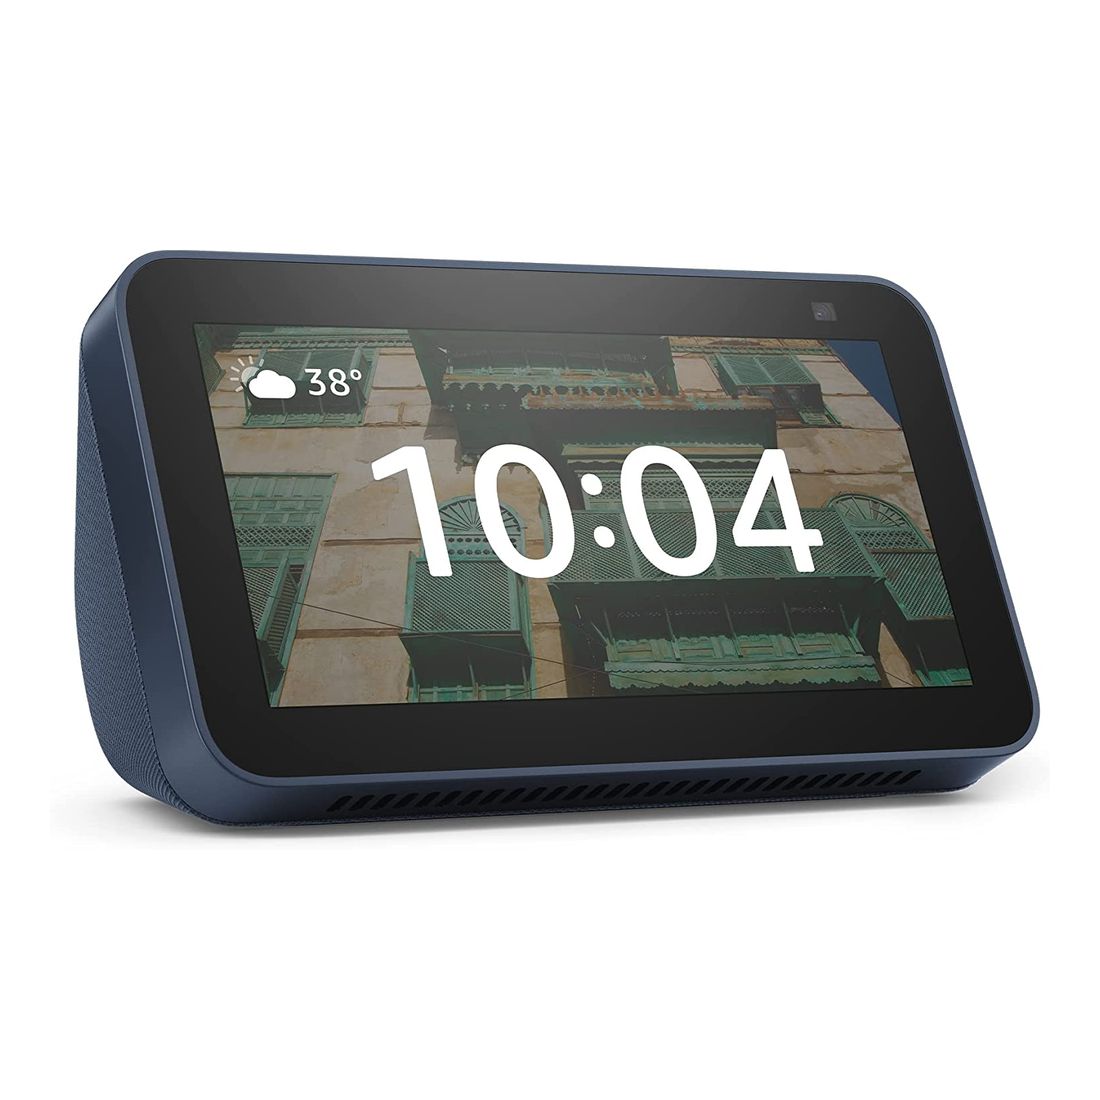 Amazon Echo Show 5 2nd Gen 2021 release Smart display with Alexa and 2 MP camera - Deep Sea Blue